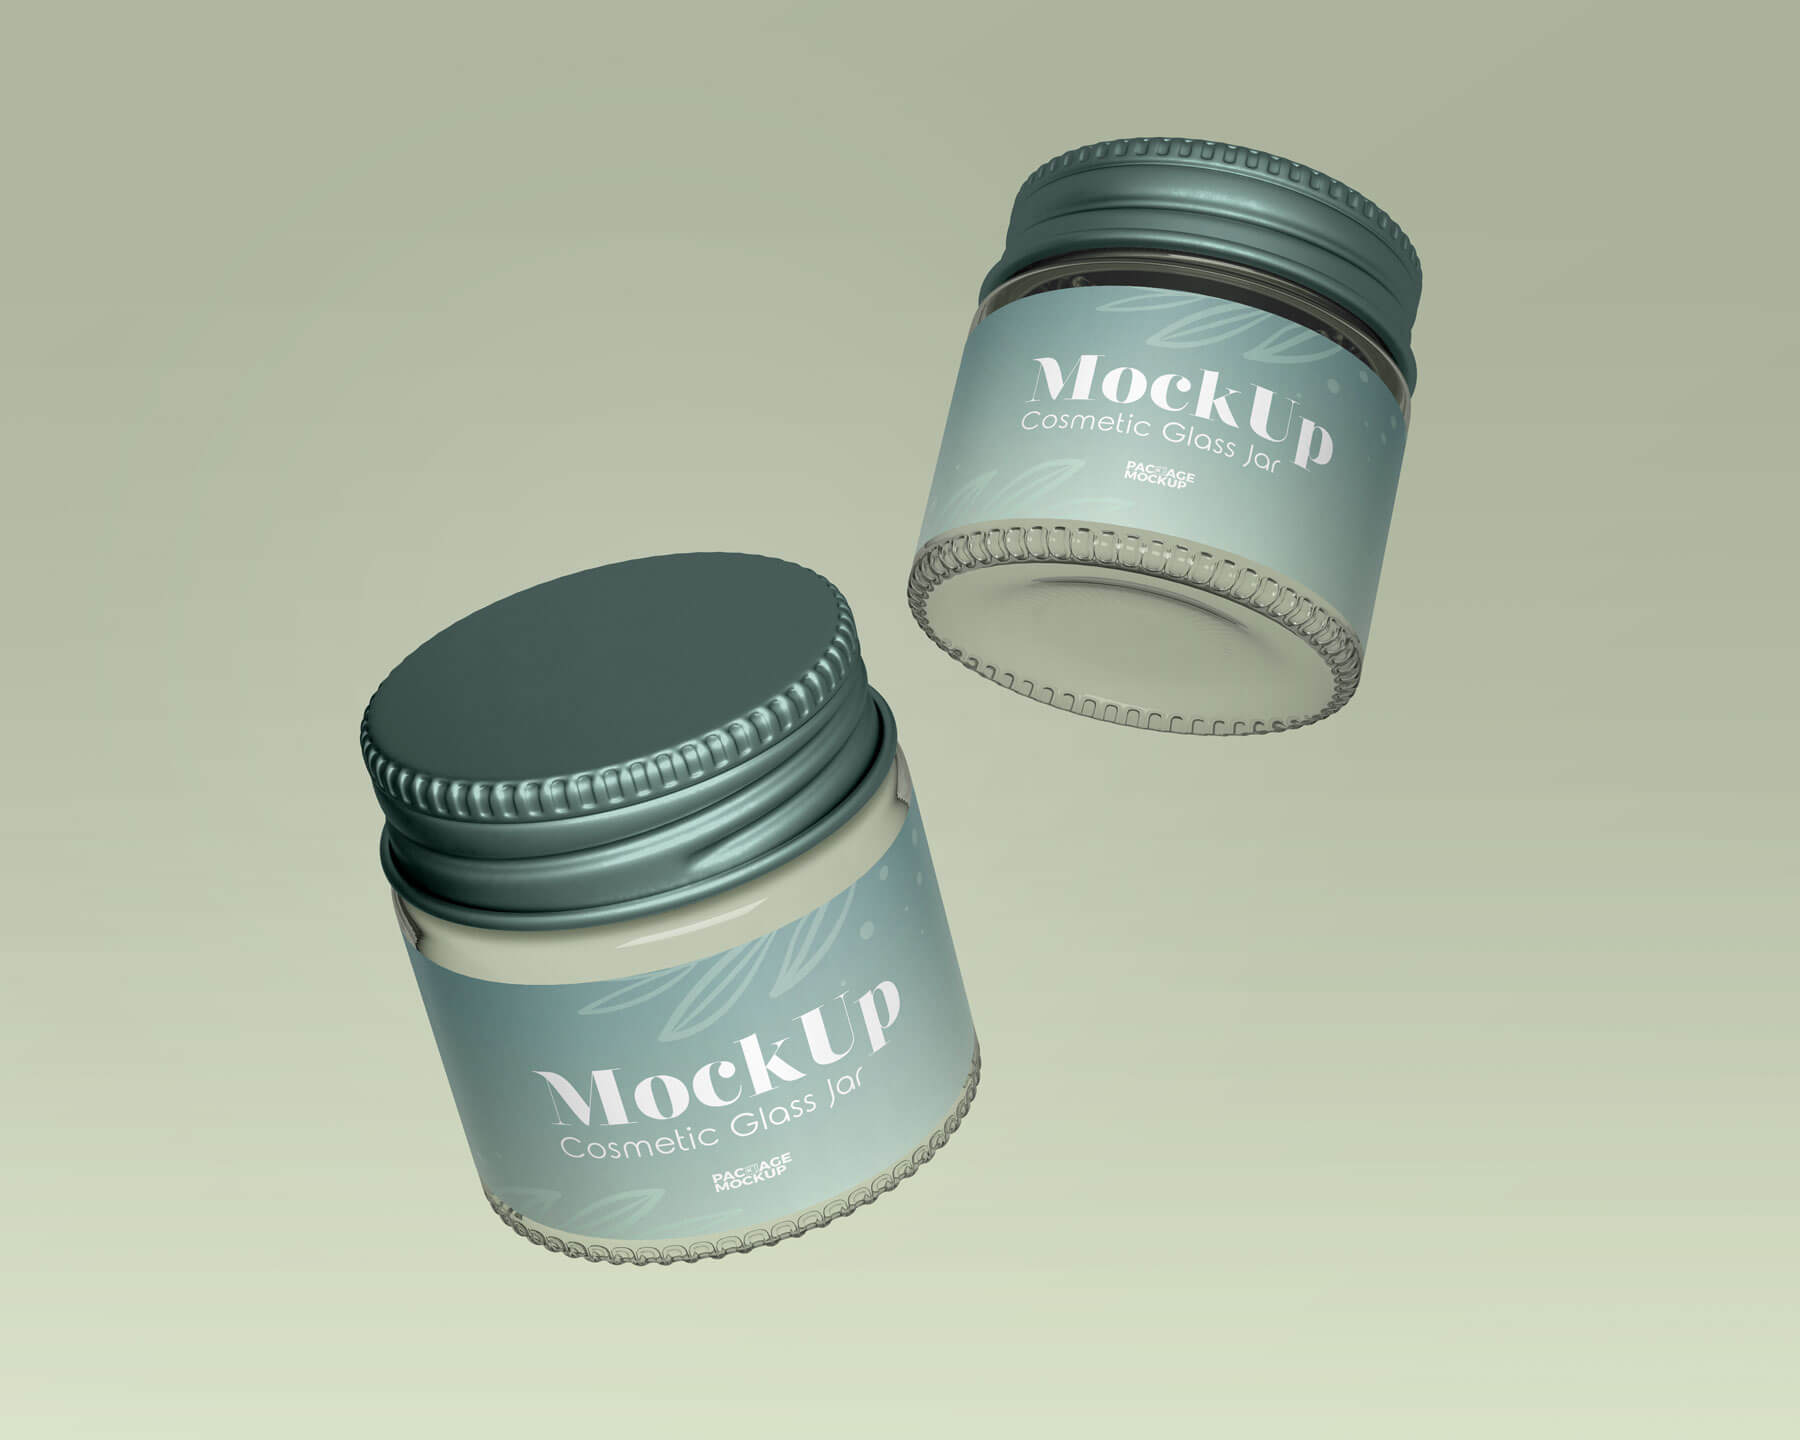 Floating cosmetic products 2 glass jar mockup